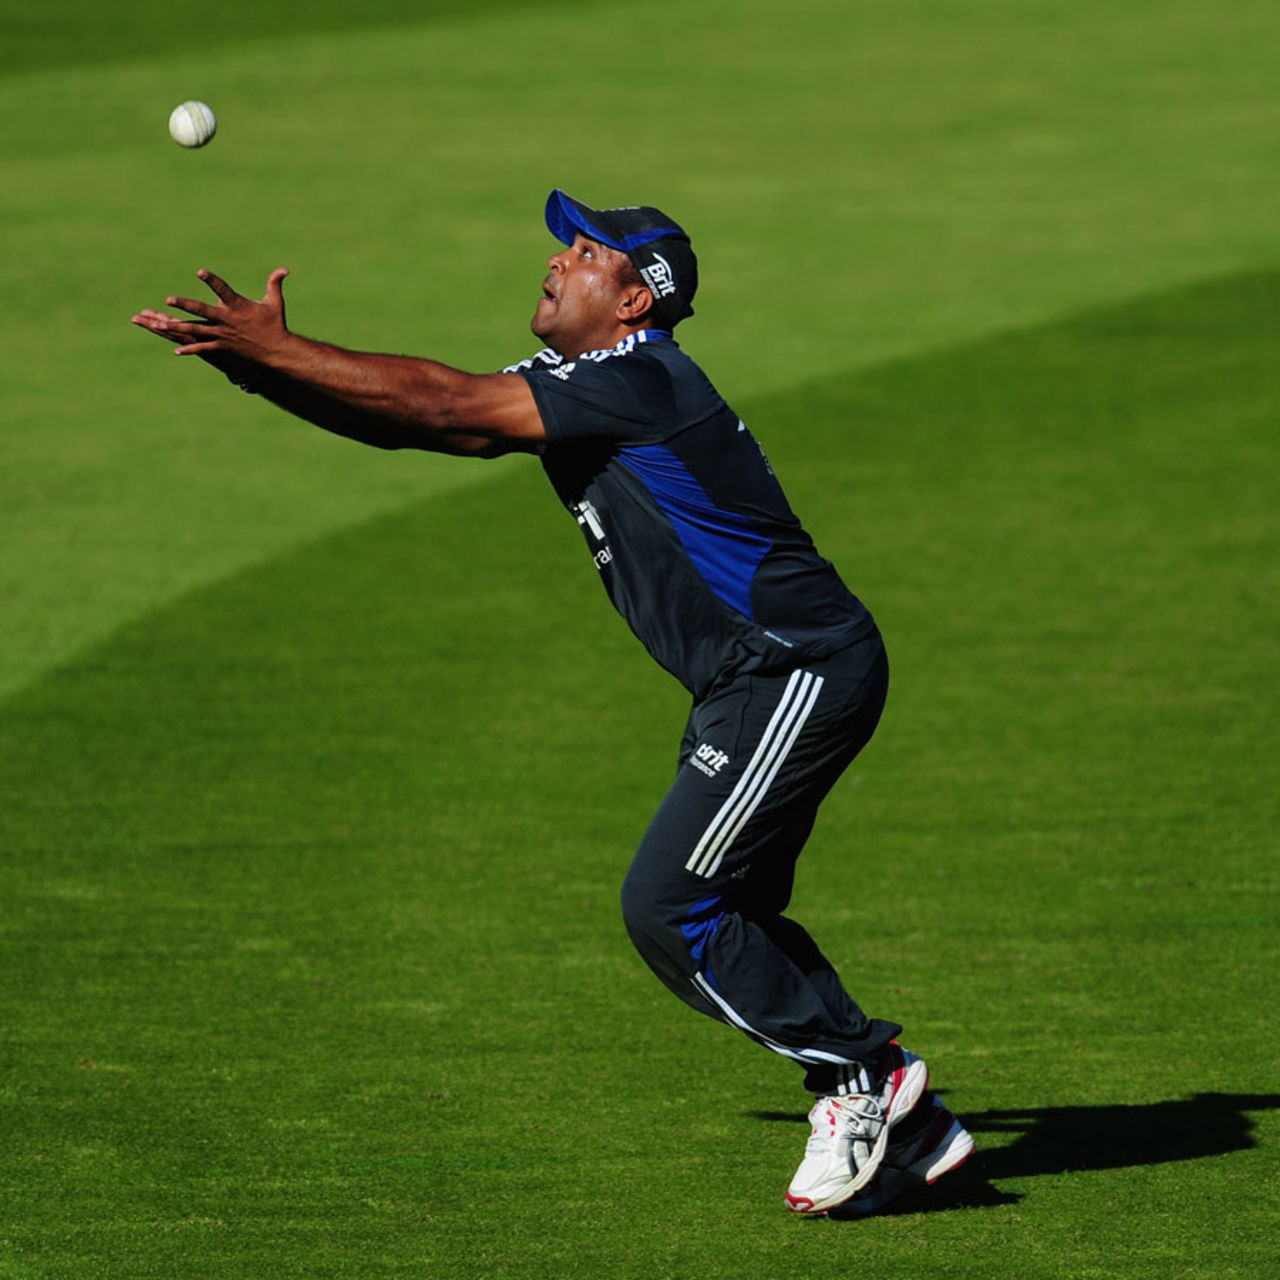 Samit Patel settles under a catch during England practice, Chester-le-Street, September 7, 2012